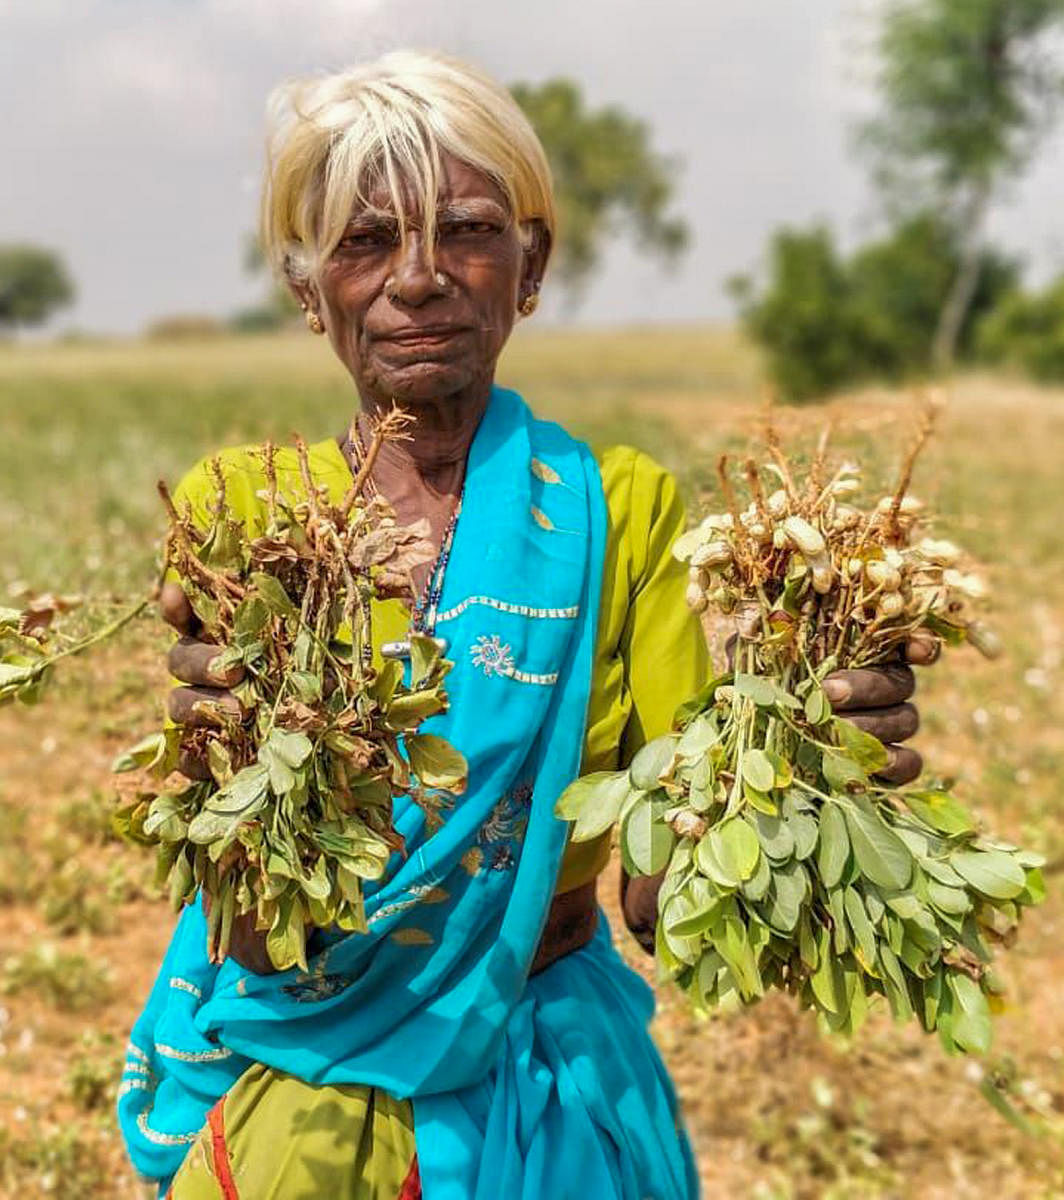 After a major crop loss, a Myasabeda family in Buddanahatti village, Challakere taluk, Chitradurga, has decided to use the failed groundnut crop as fodder for the sheep being reared by them. Photo by Ashwini Y S